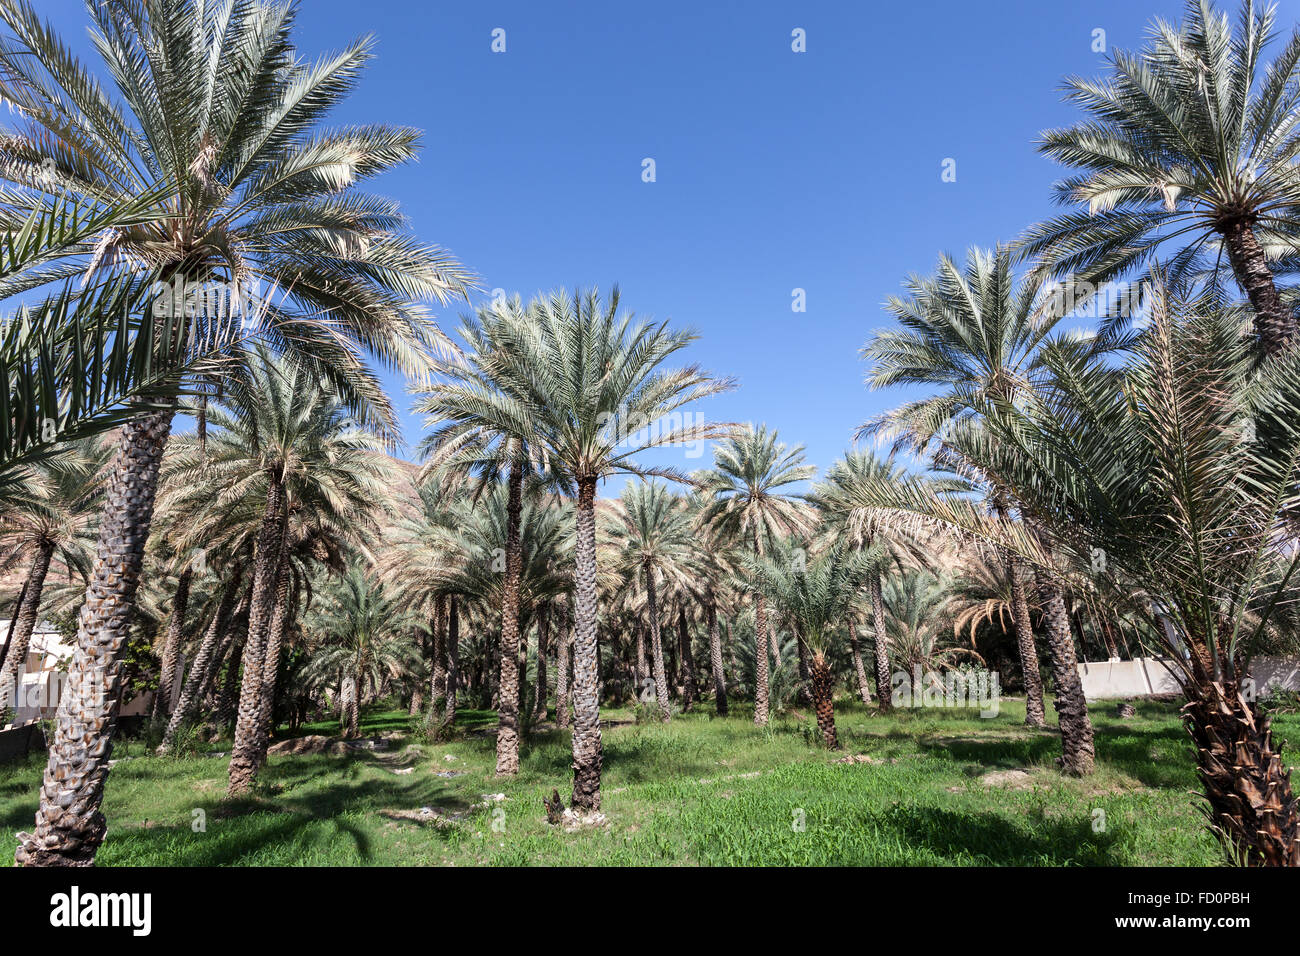 Palm trees in an oasis, Oman Stock Photo